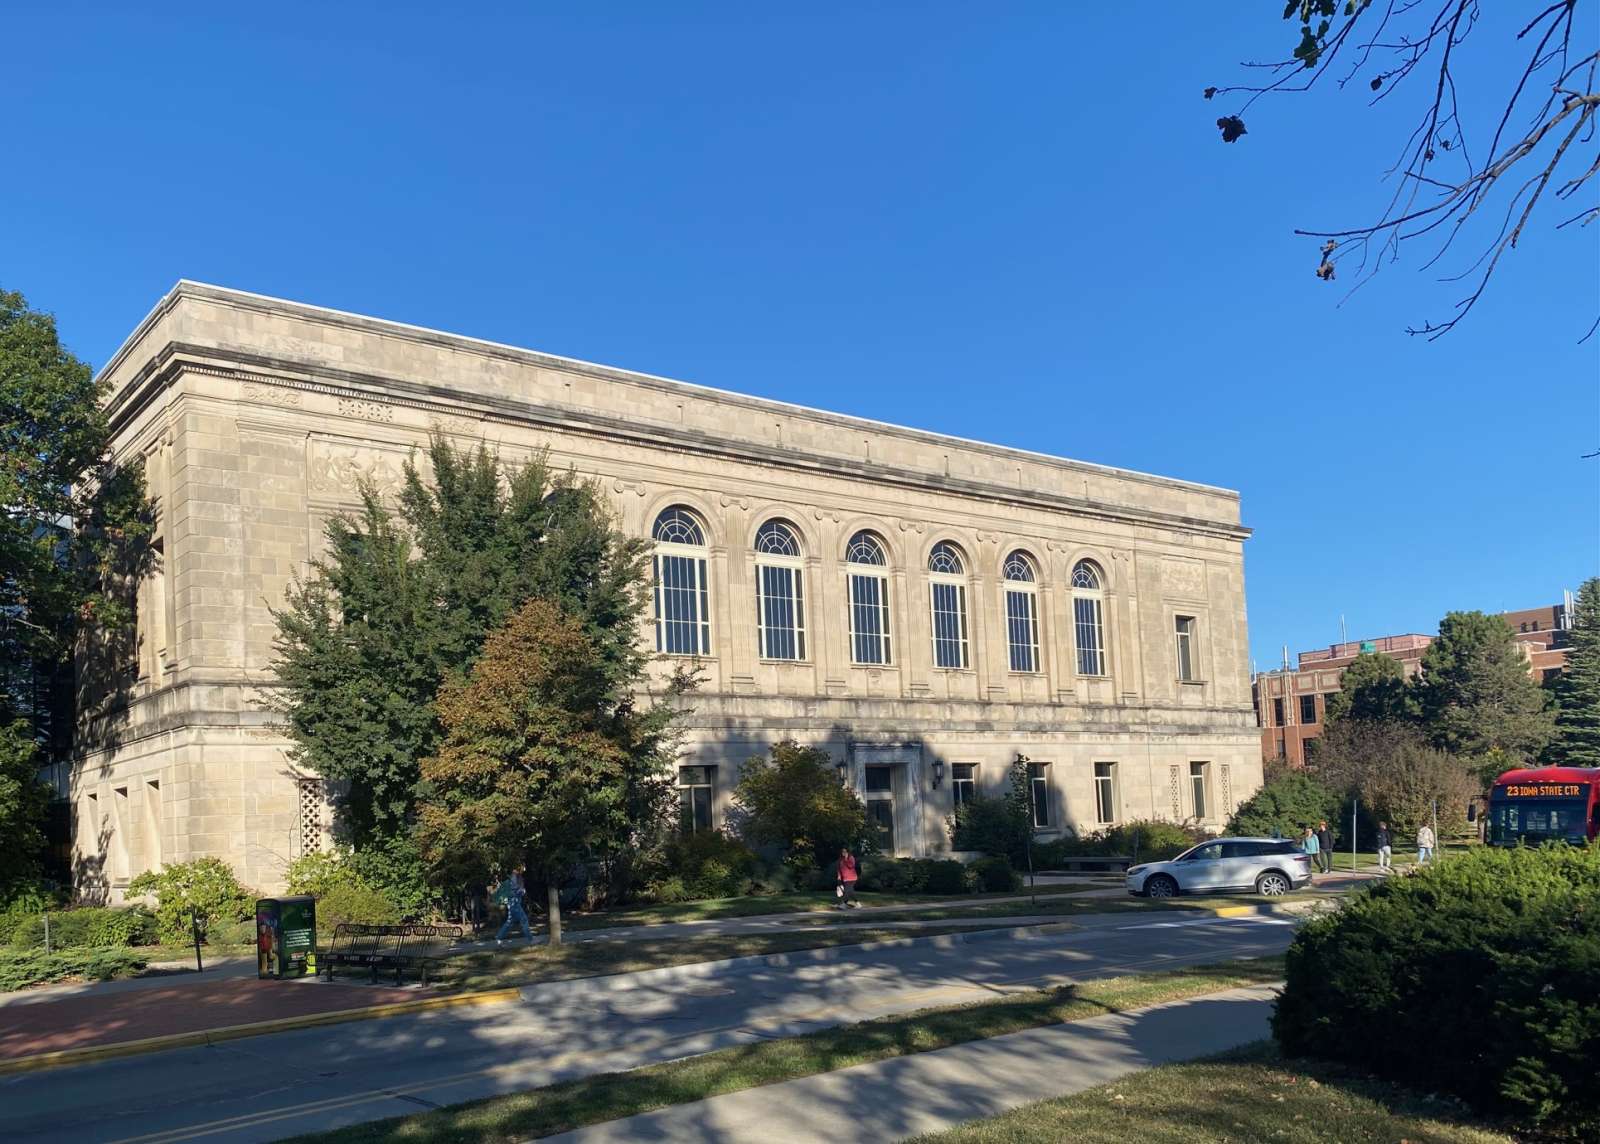 Original library building, two-story, limestone structure against a bright blue sky